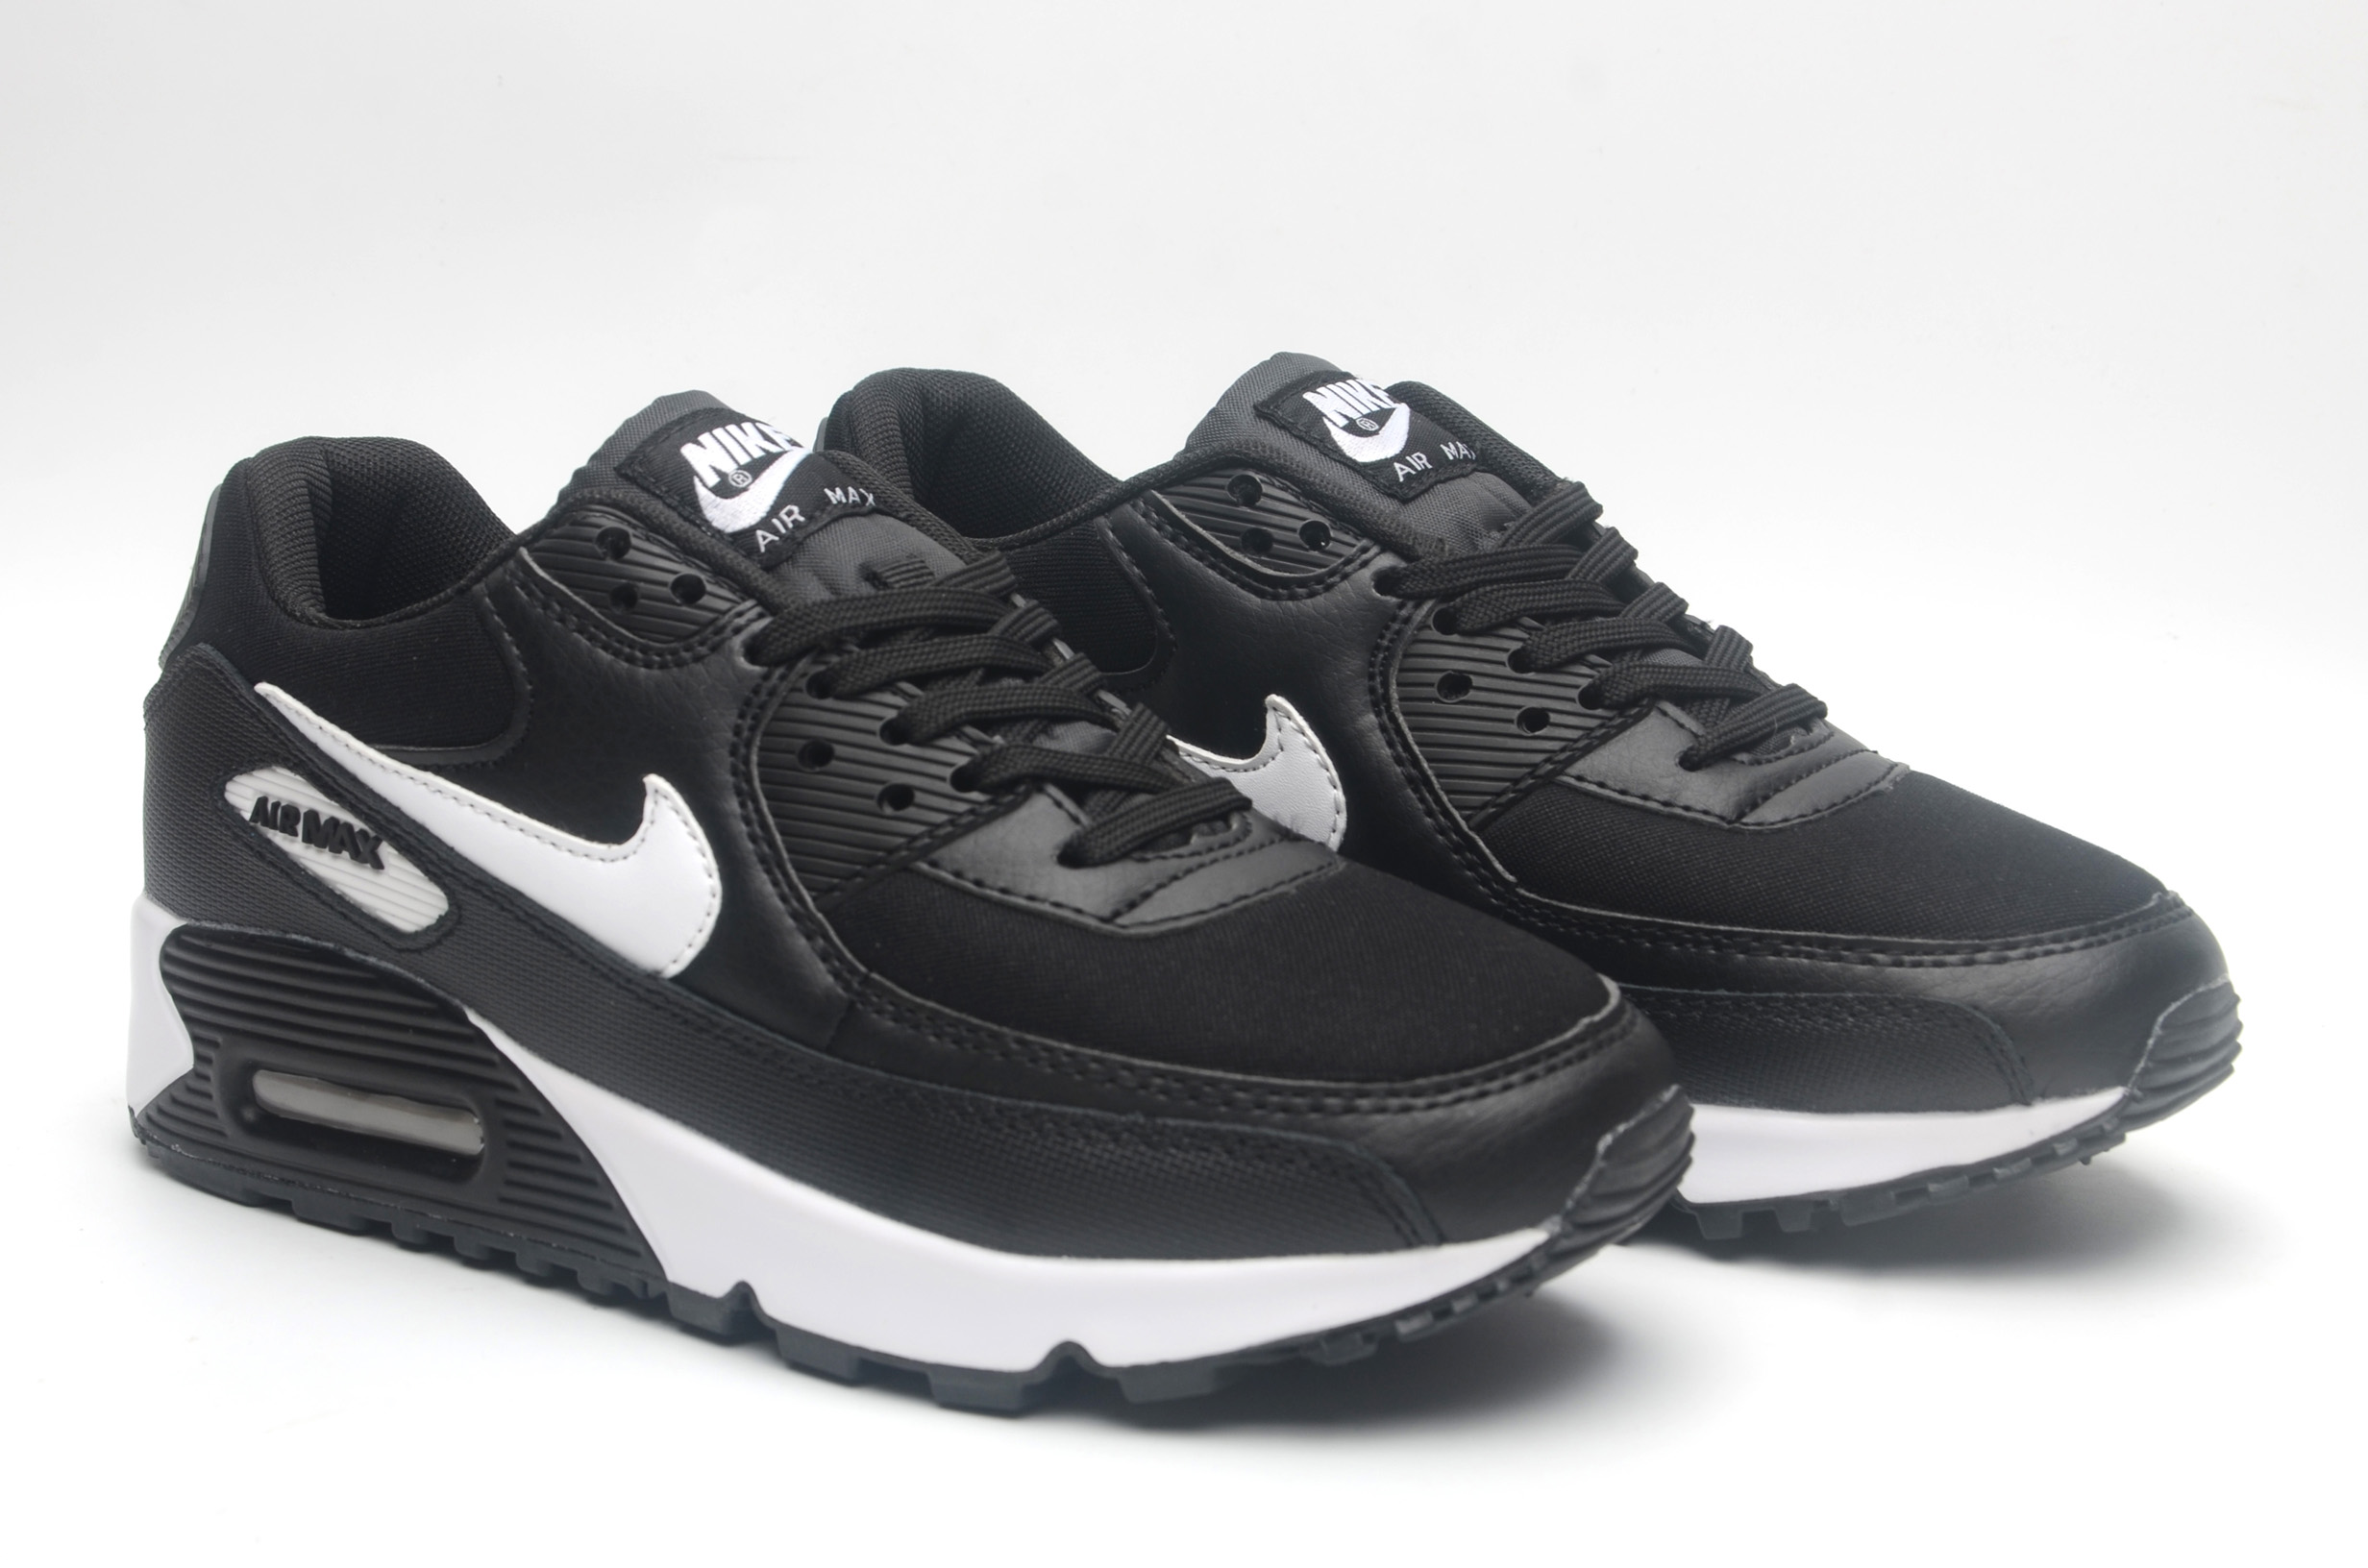 Men's Running weapon Air Max 90 Shoes 038